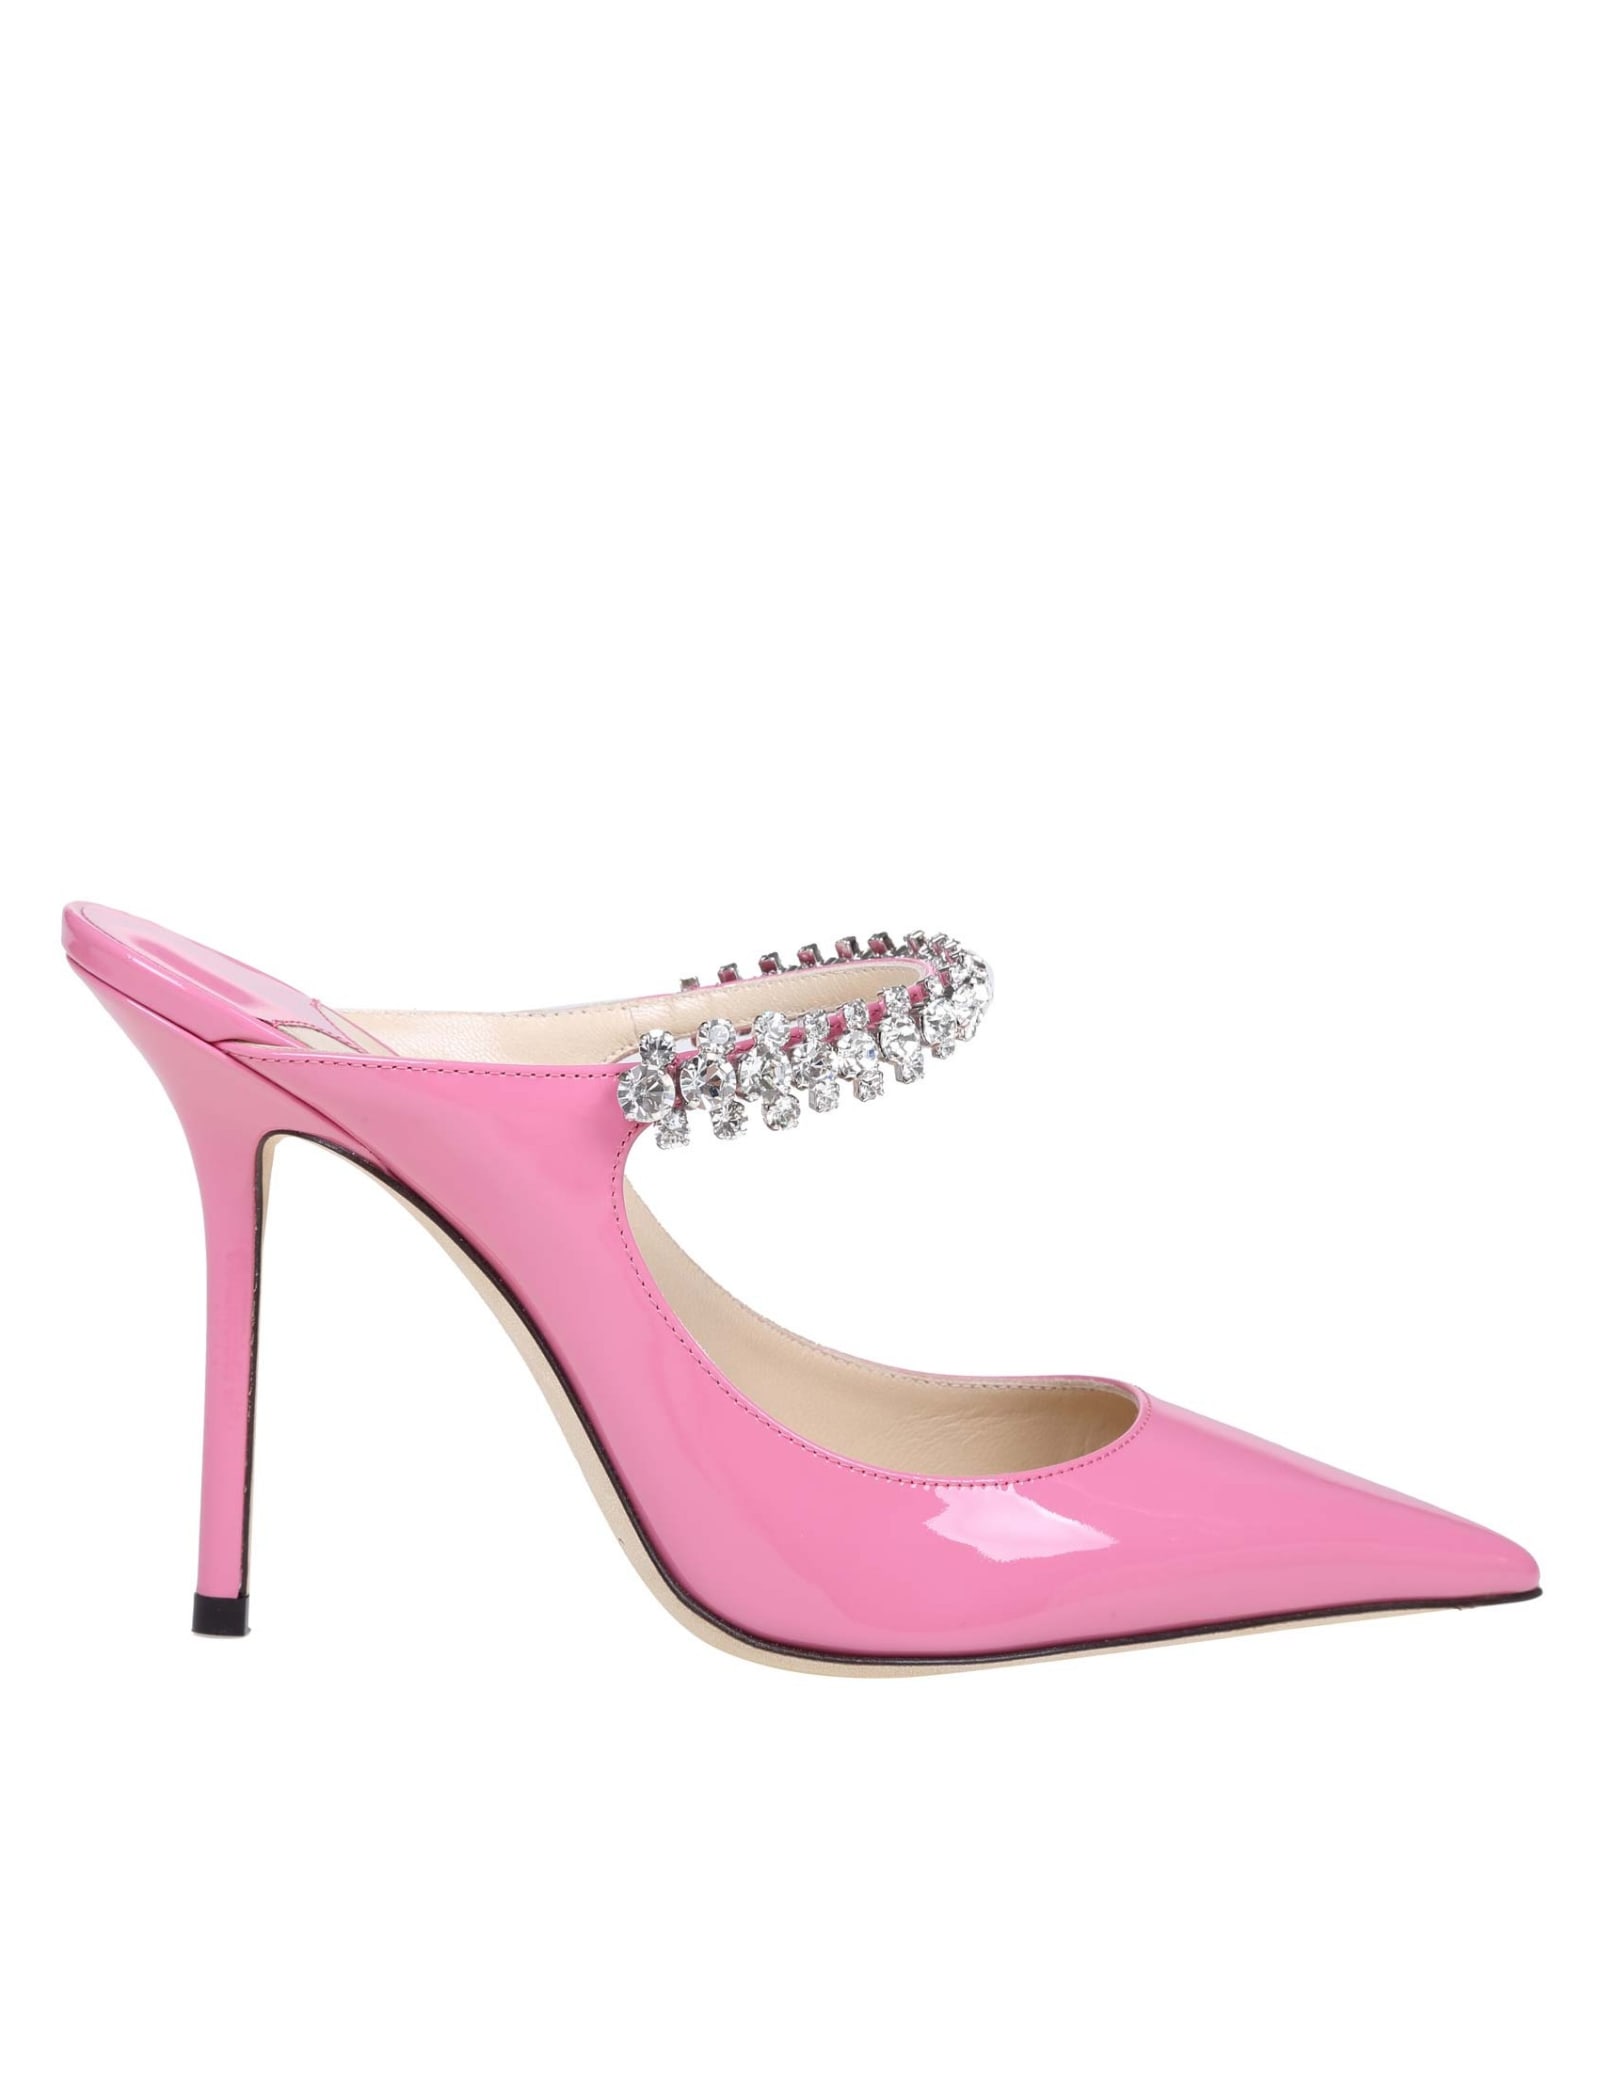 Jimmy Choo Mules Bing 100 In Pink Leather With Crystal Strap